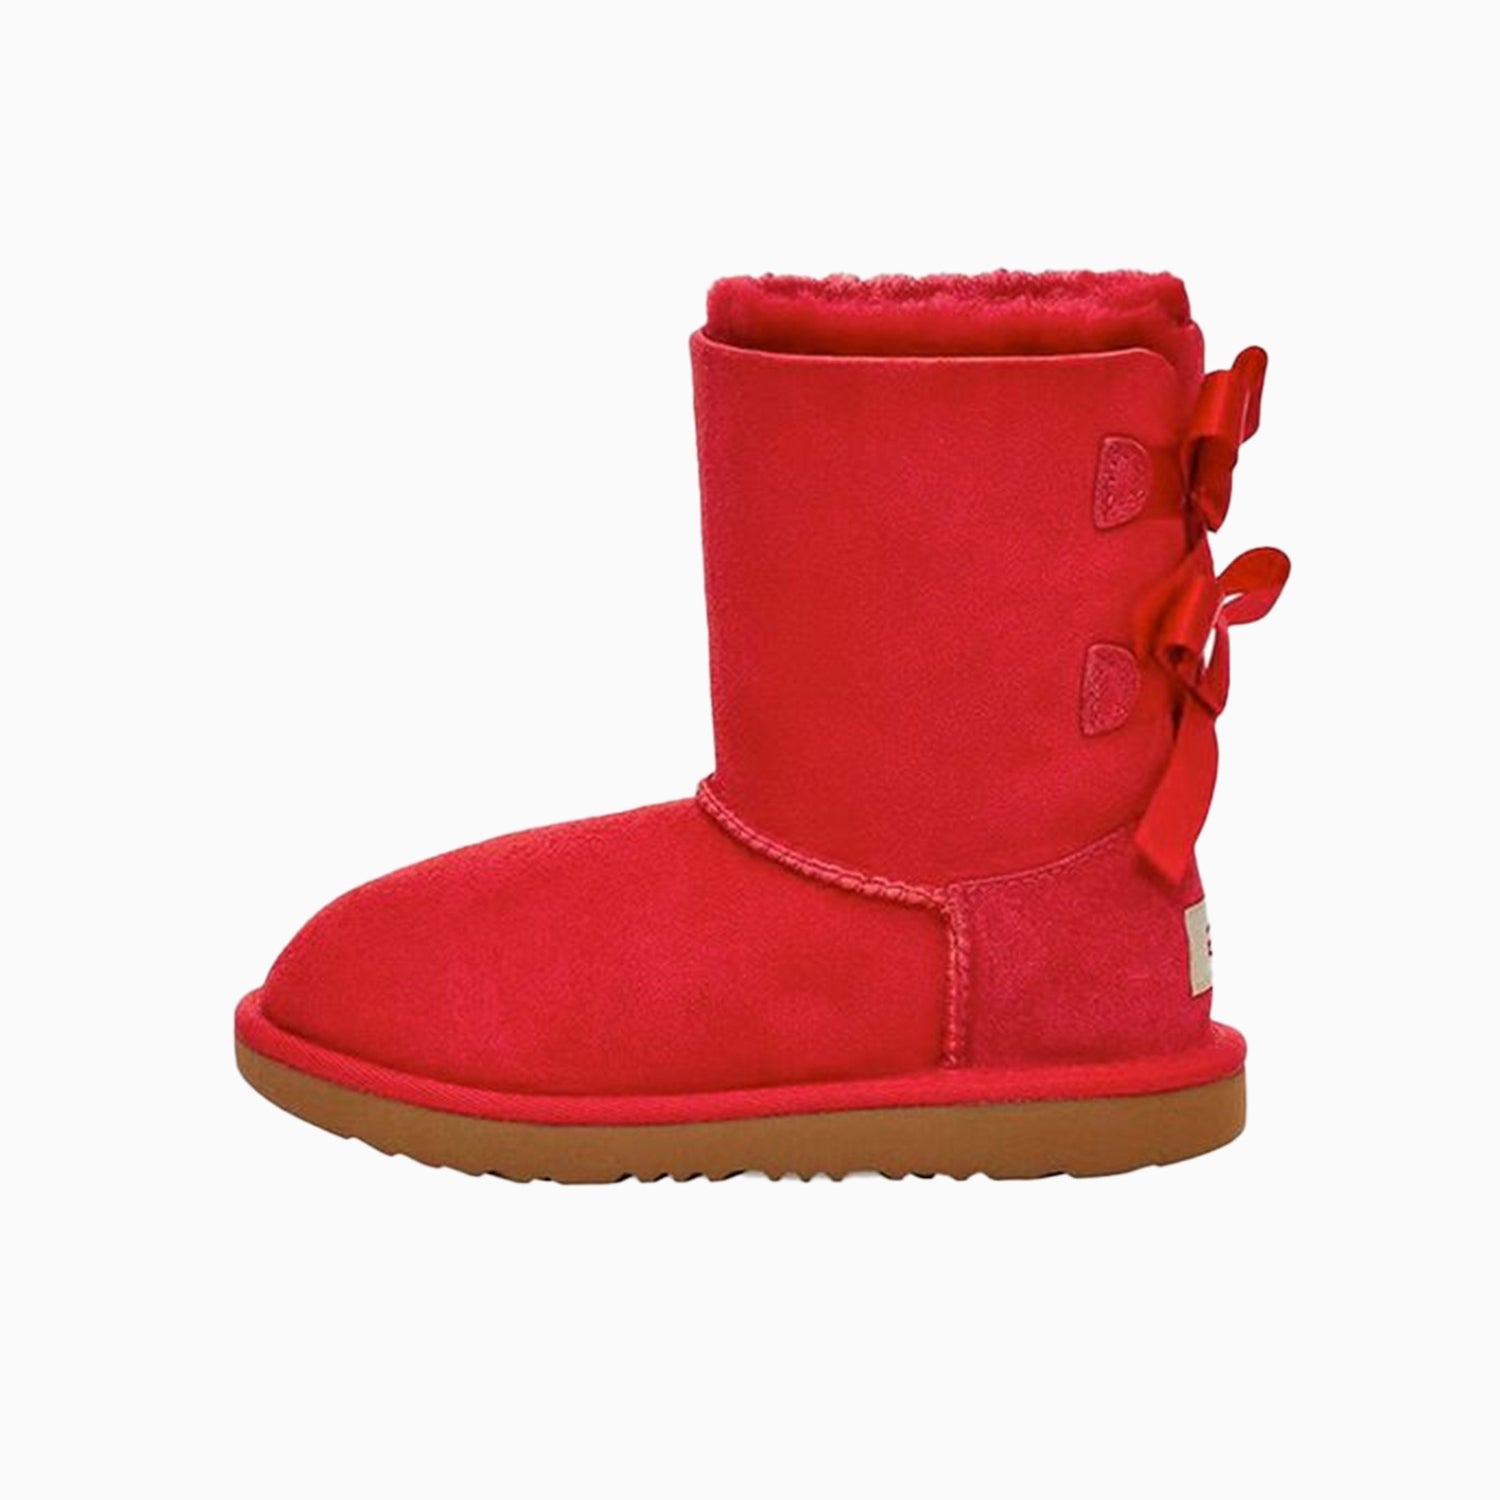 ugg-kids-bailey-bow-ii-boot-toddler-1017394t-rbrd